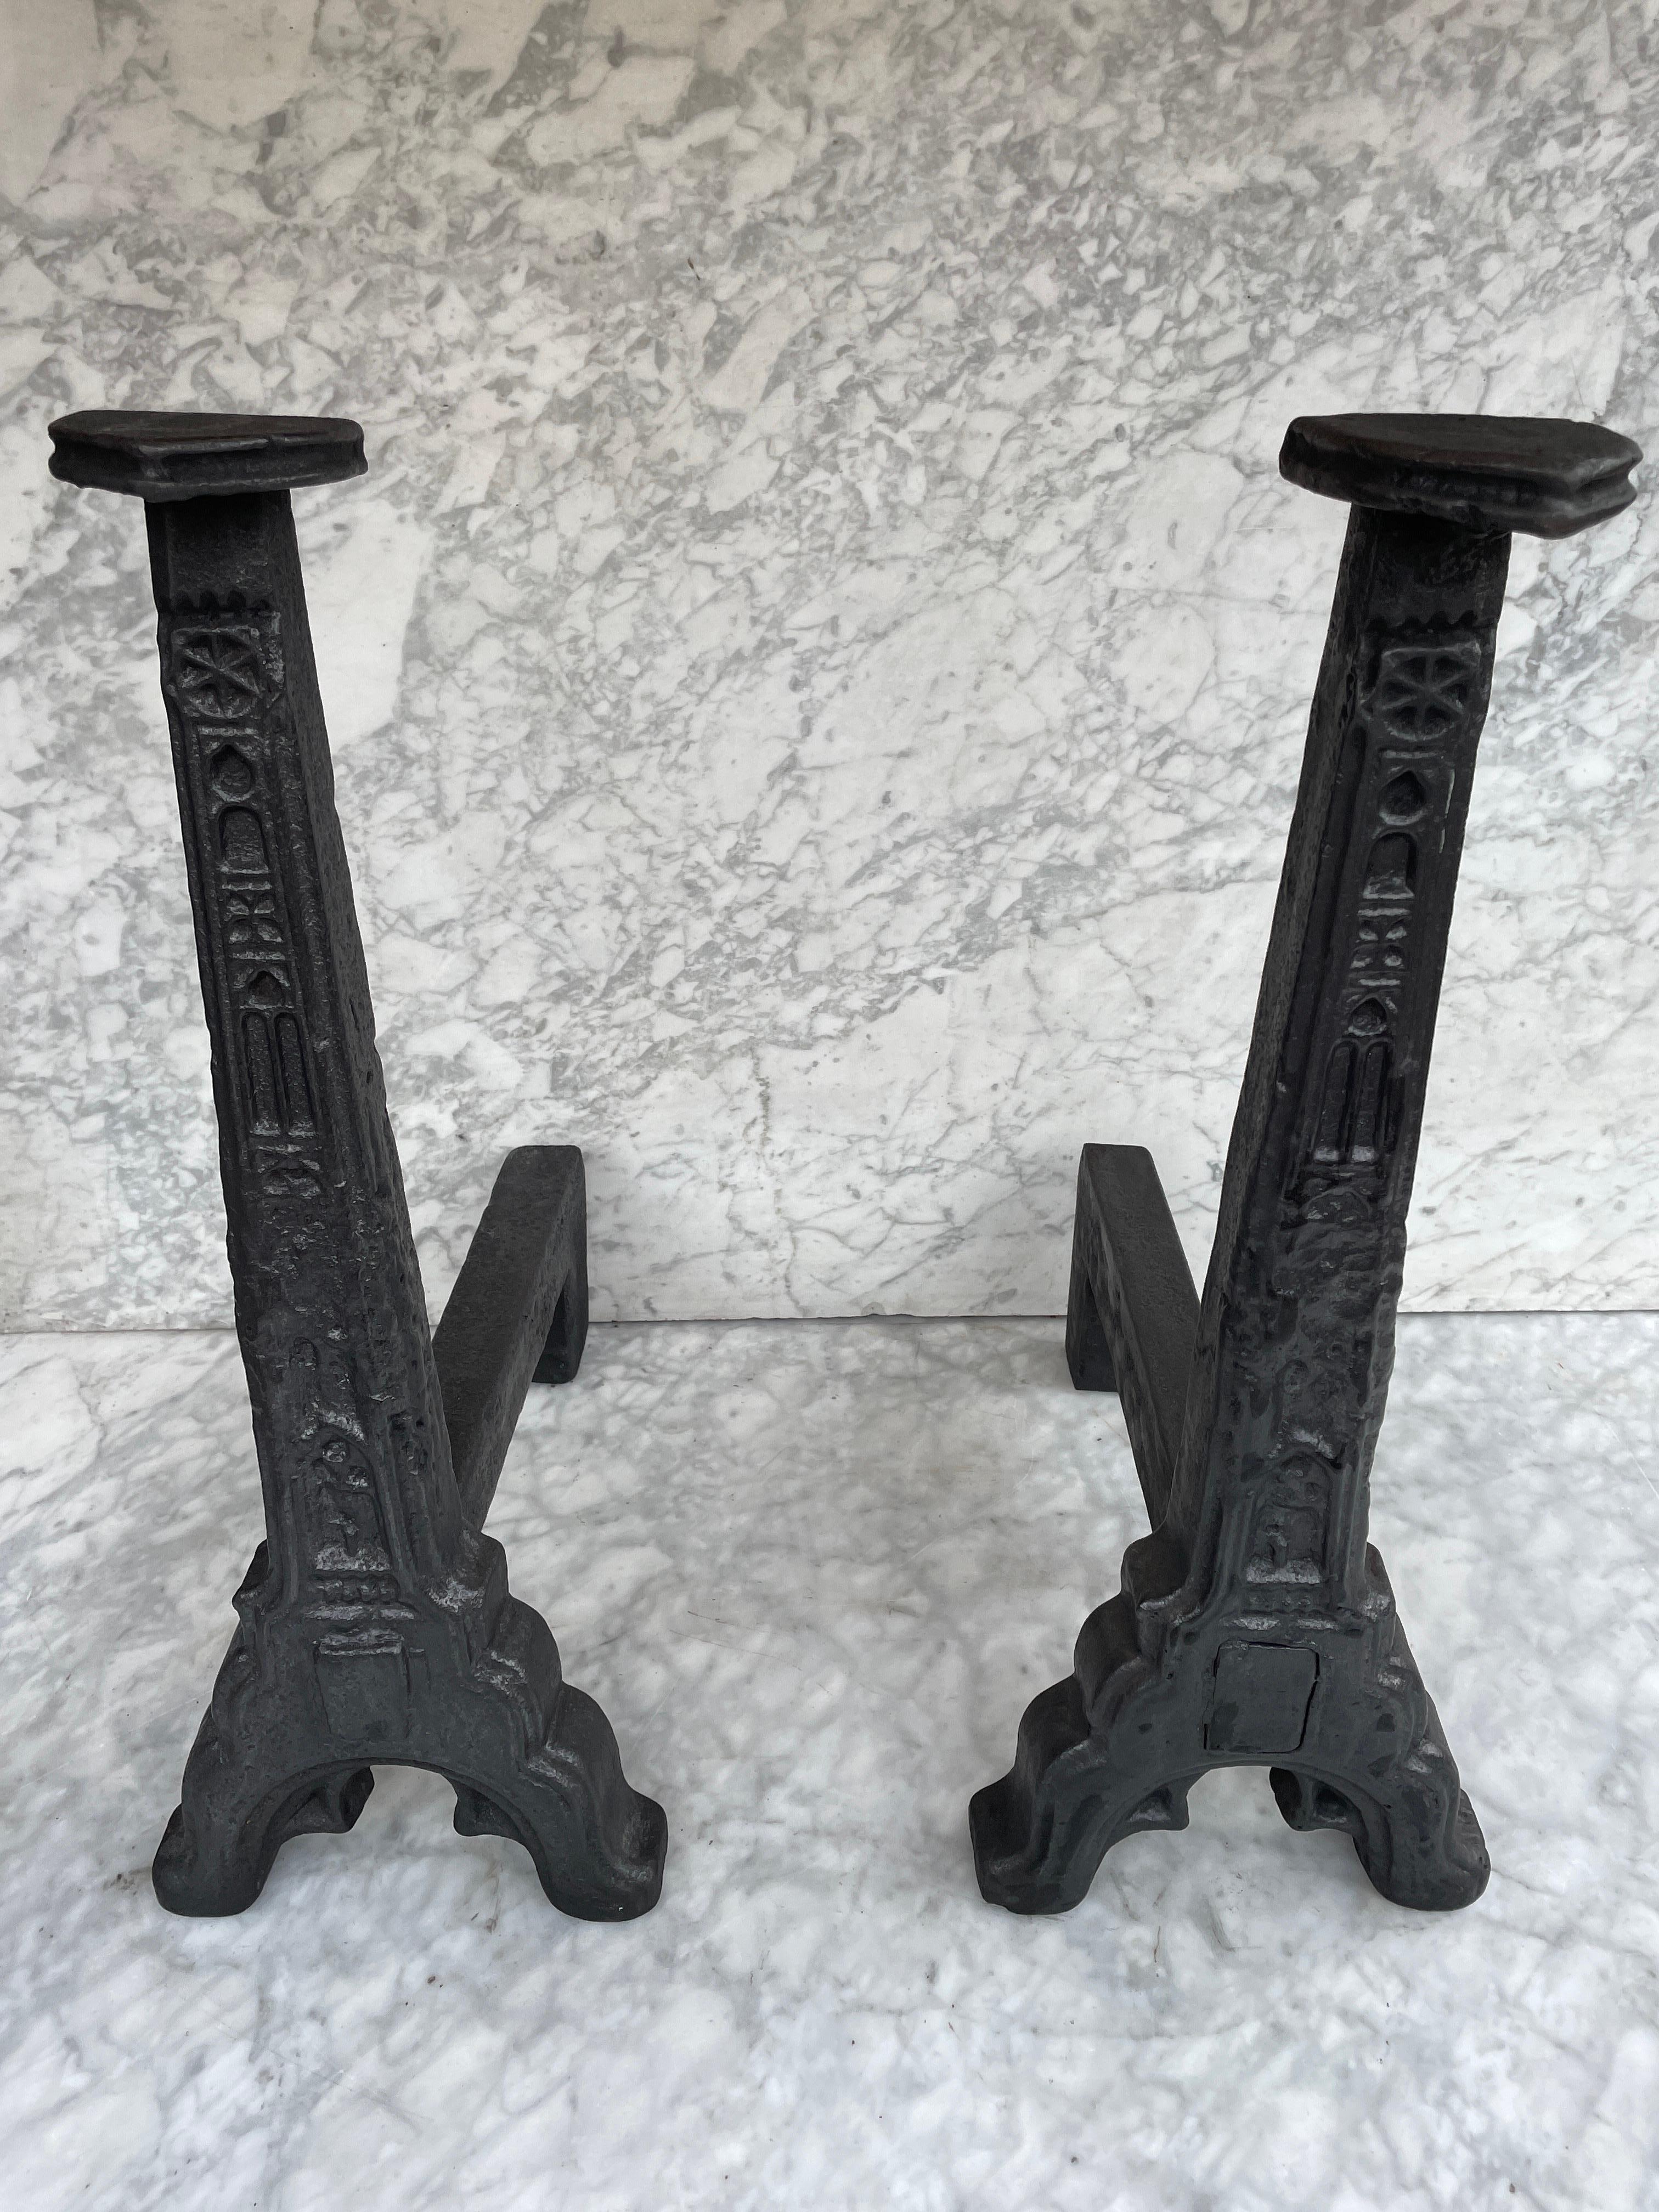 Antique French andirons or firedogs, 19th century
Beautiful set of andirons made from cast iron. The impressive size makes this pair stand out. 
The weight of this pair is about 34 kg for the set.